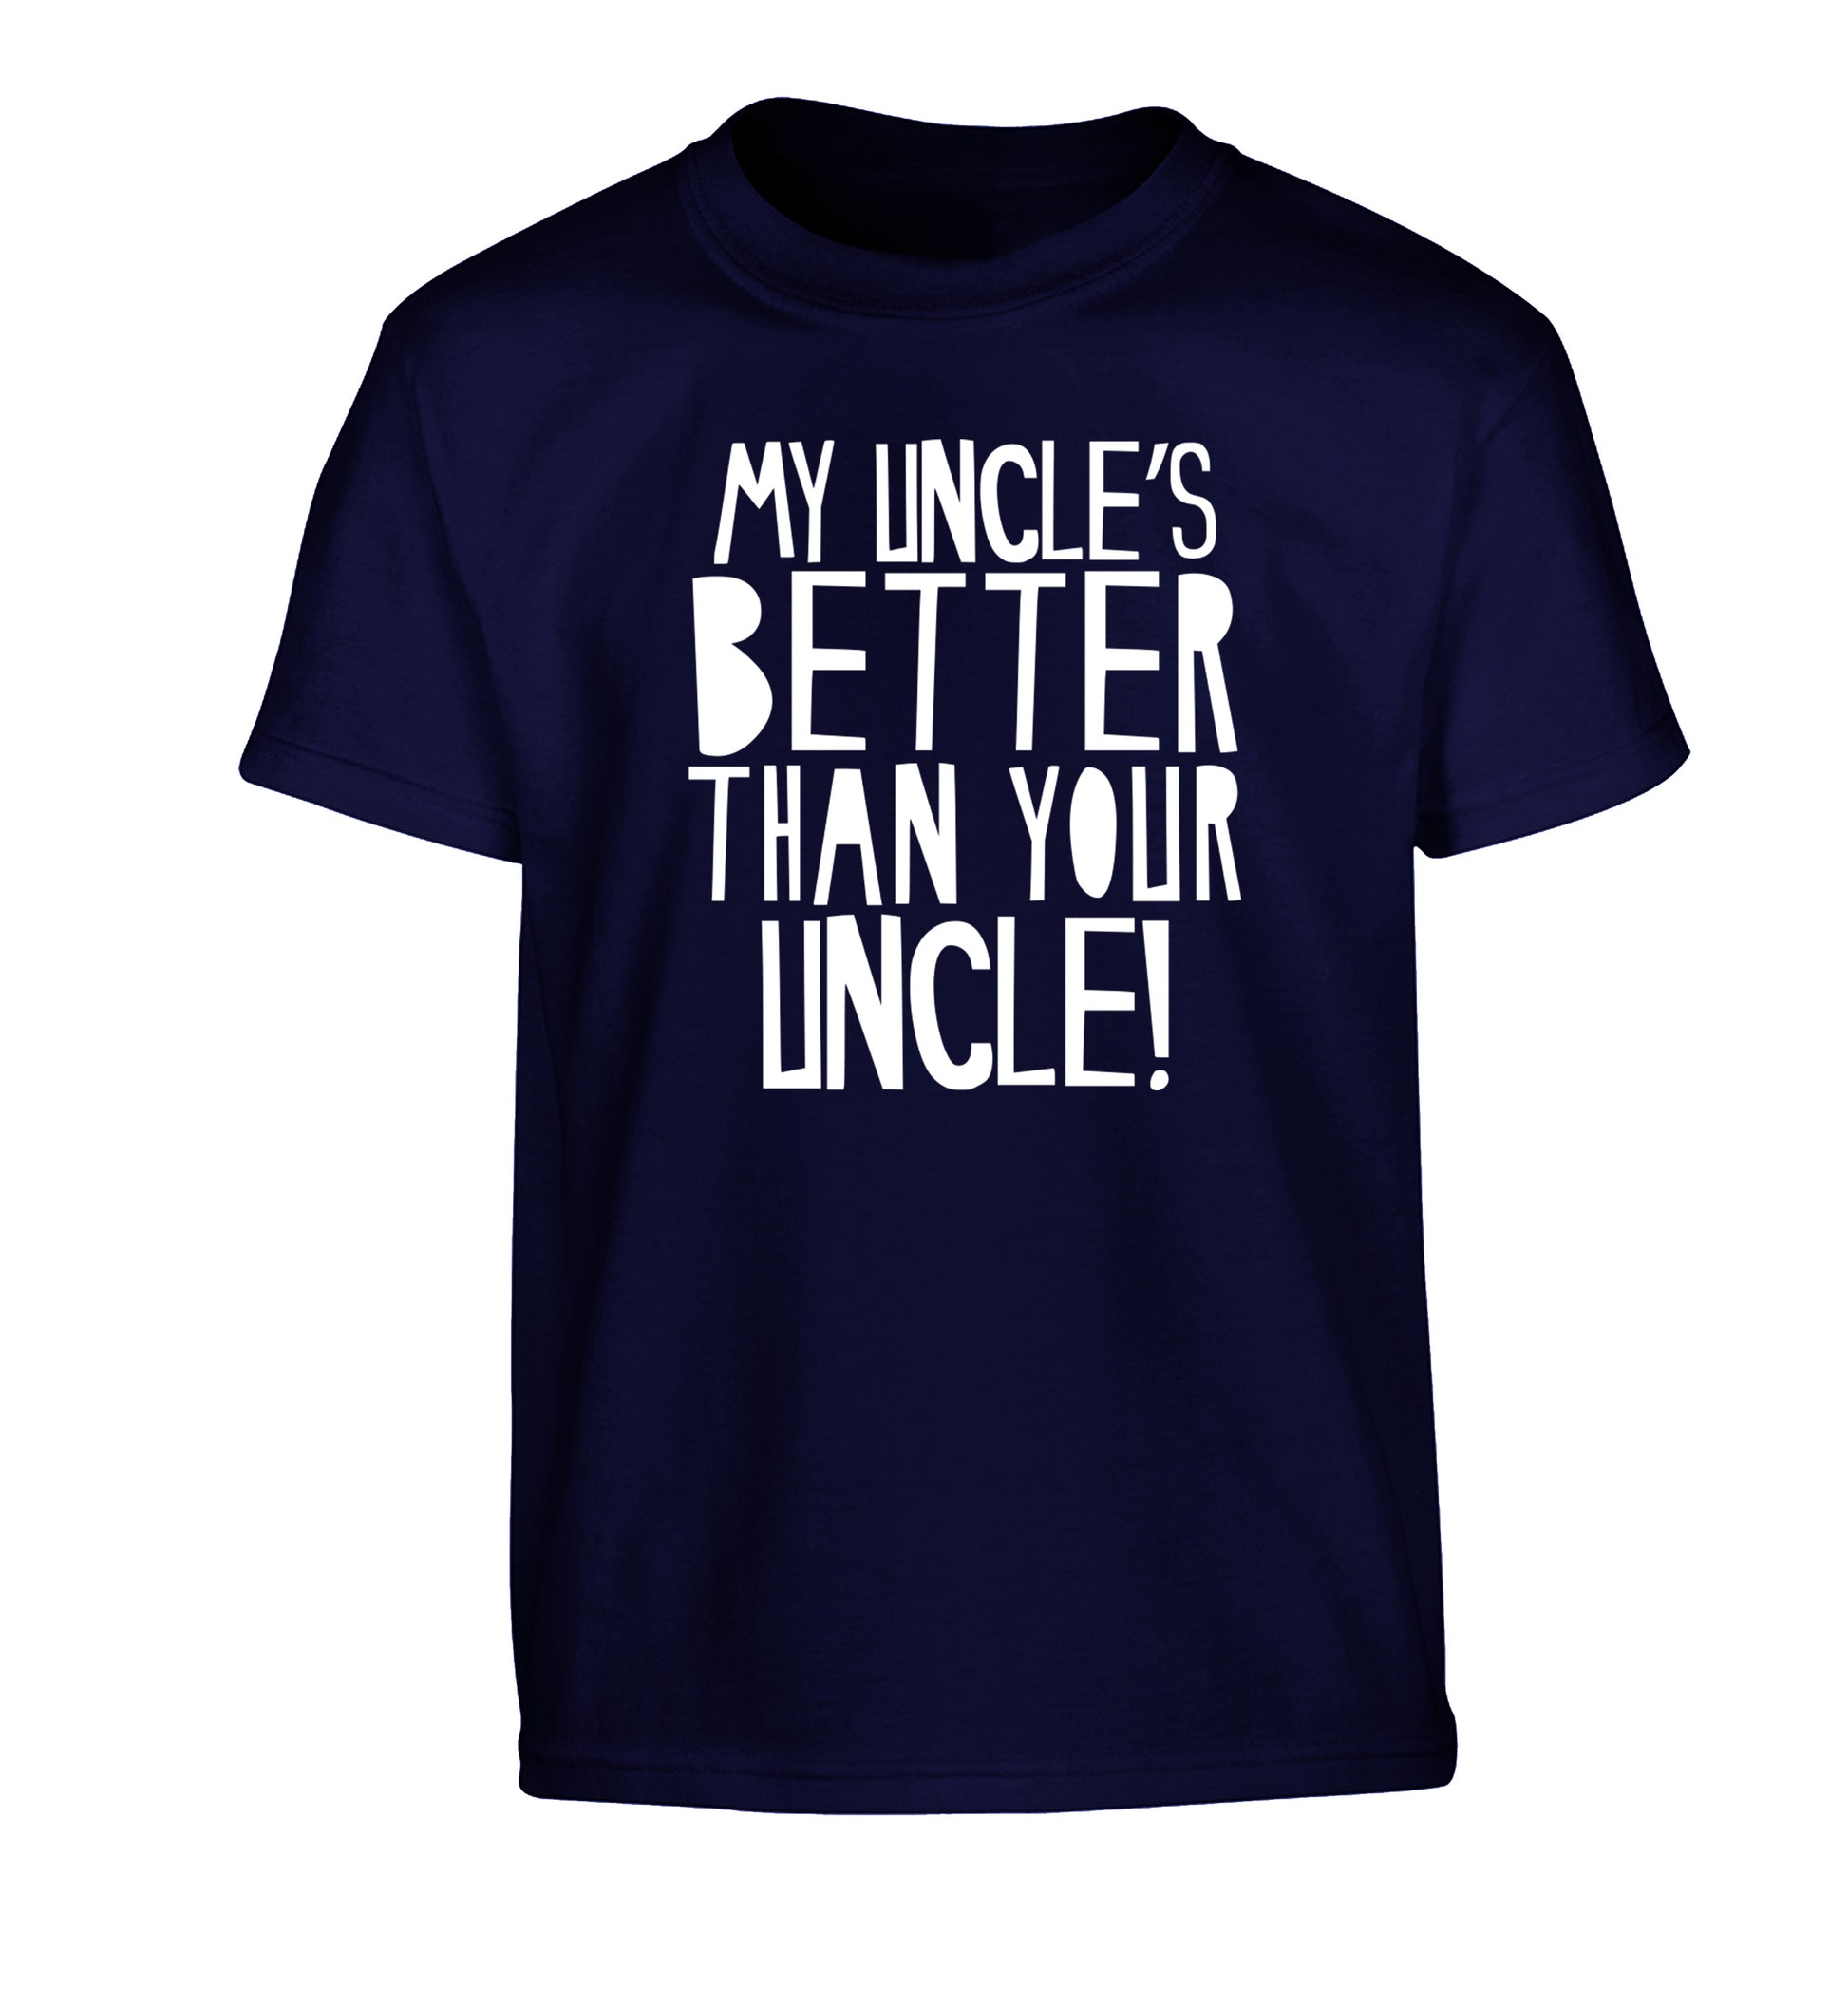 My uncles better than your uncle Children's navy Tshirt 12-13 Years